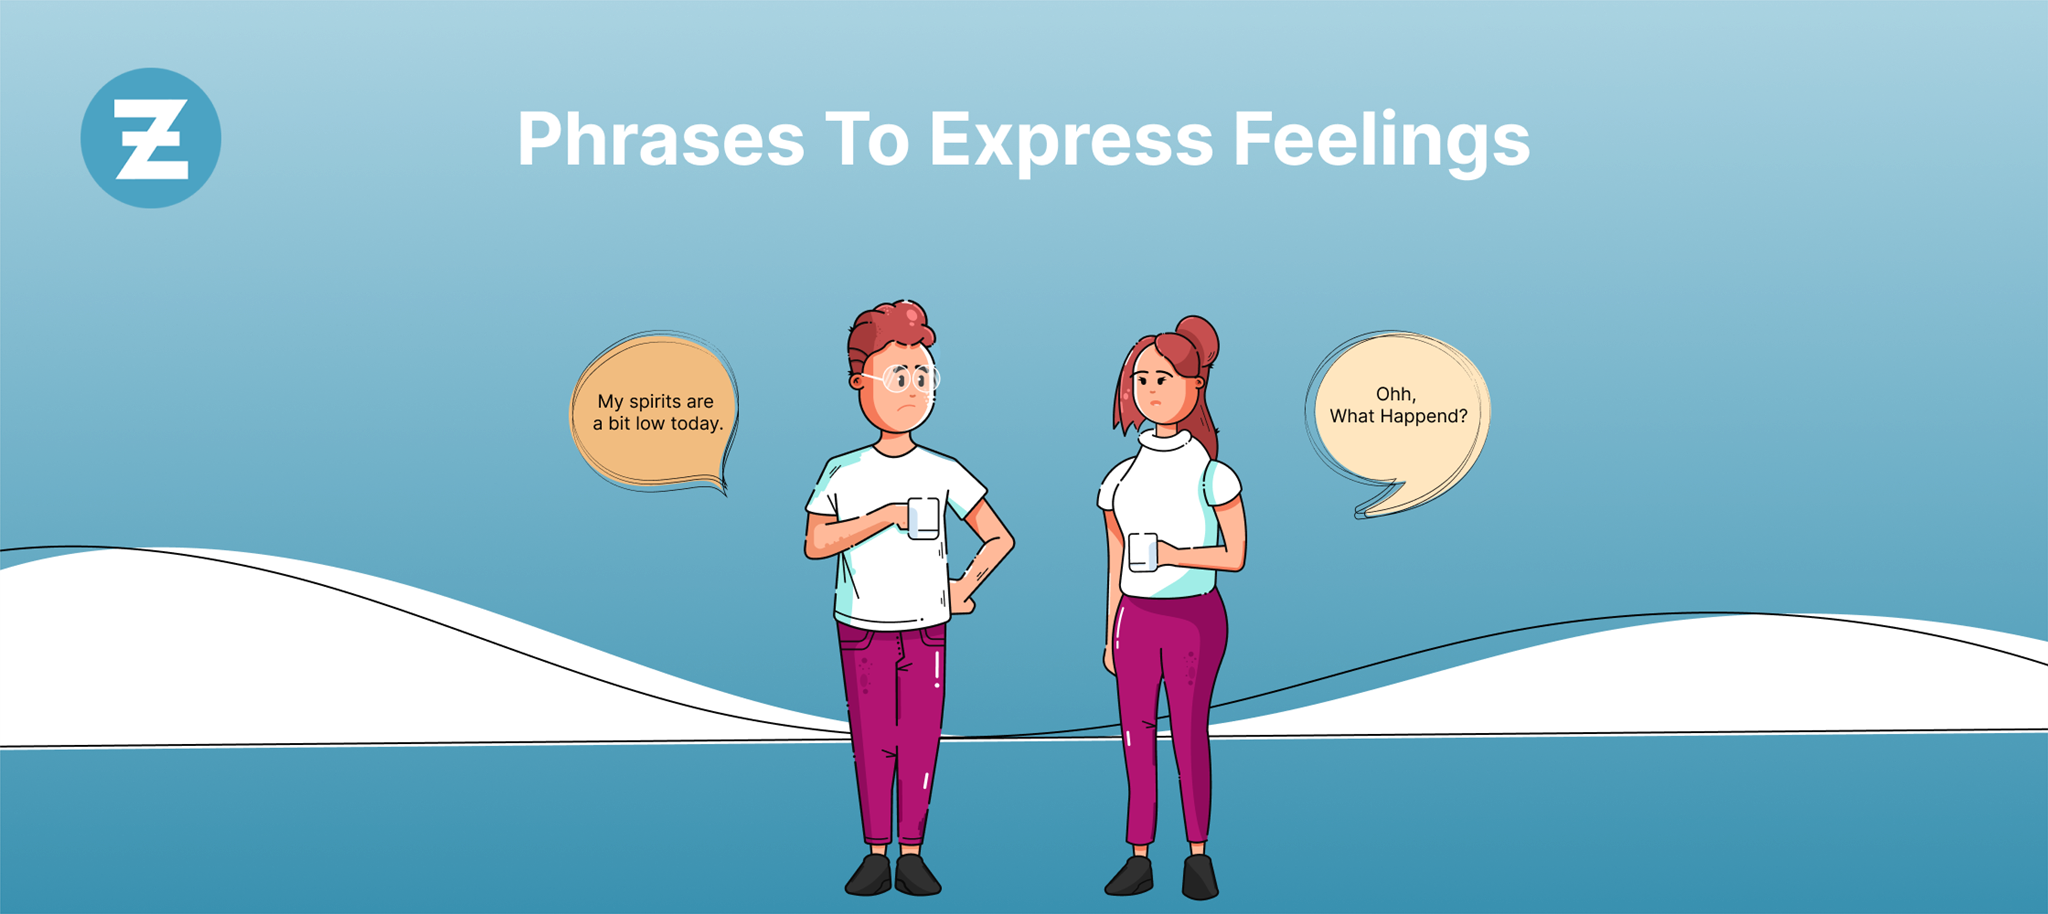 English phrases used to express feelings